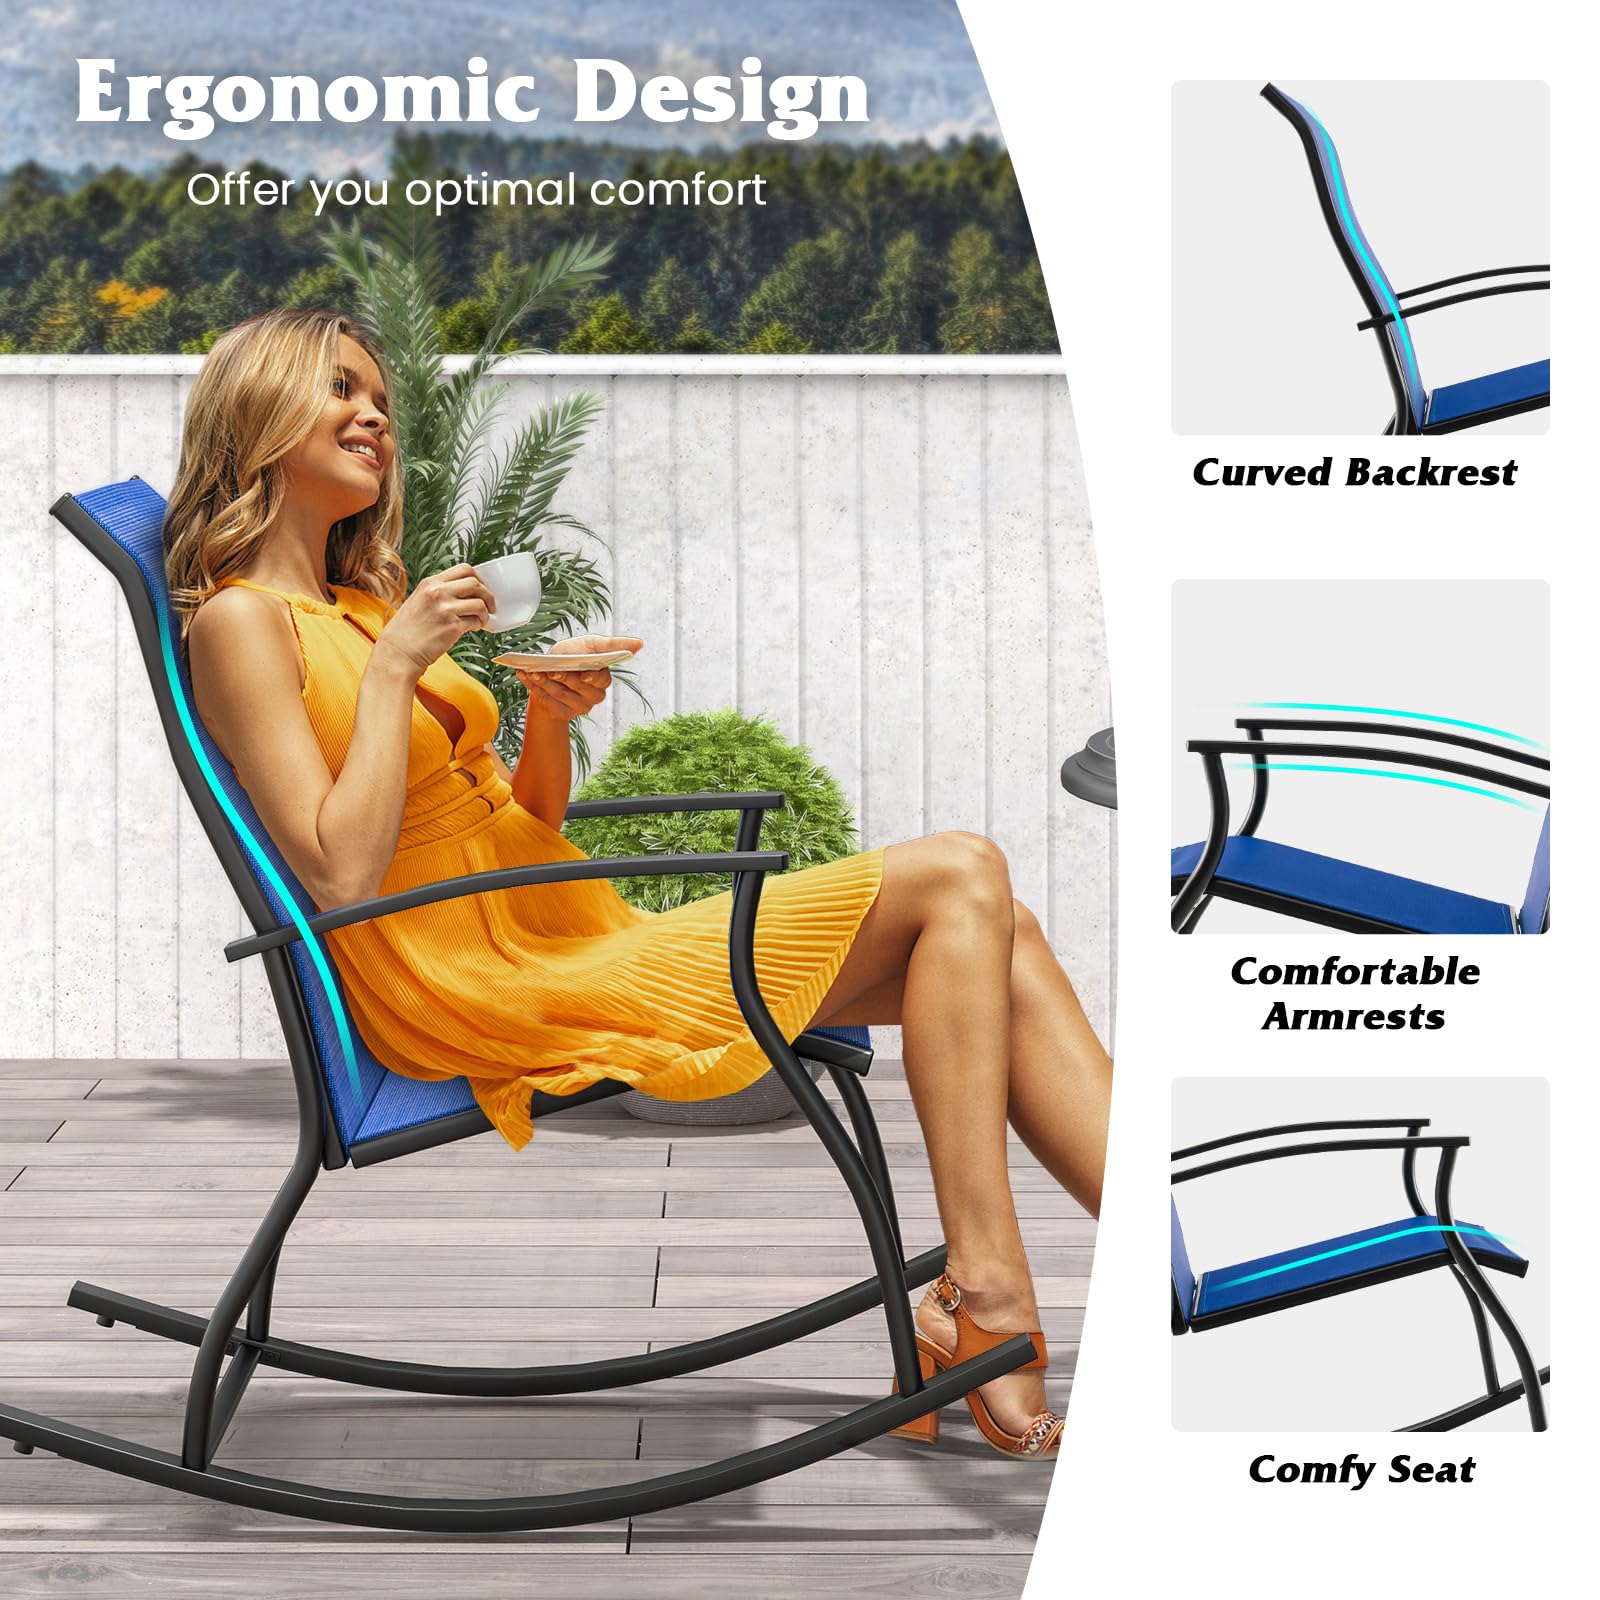 Giantex Outdoor Rocking Chair Set of 2 - Patio Rocking Chairs w/Breathable Backrest, Navy